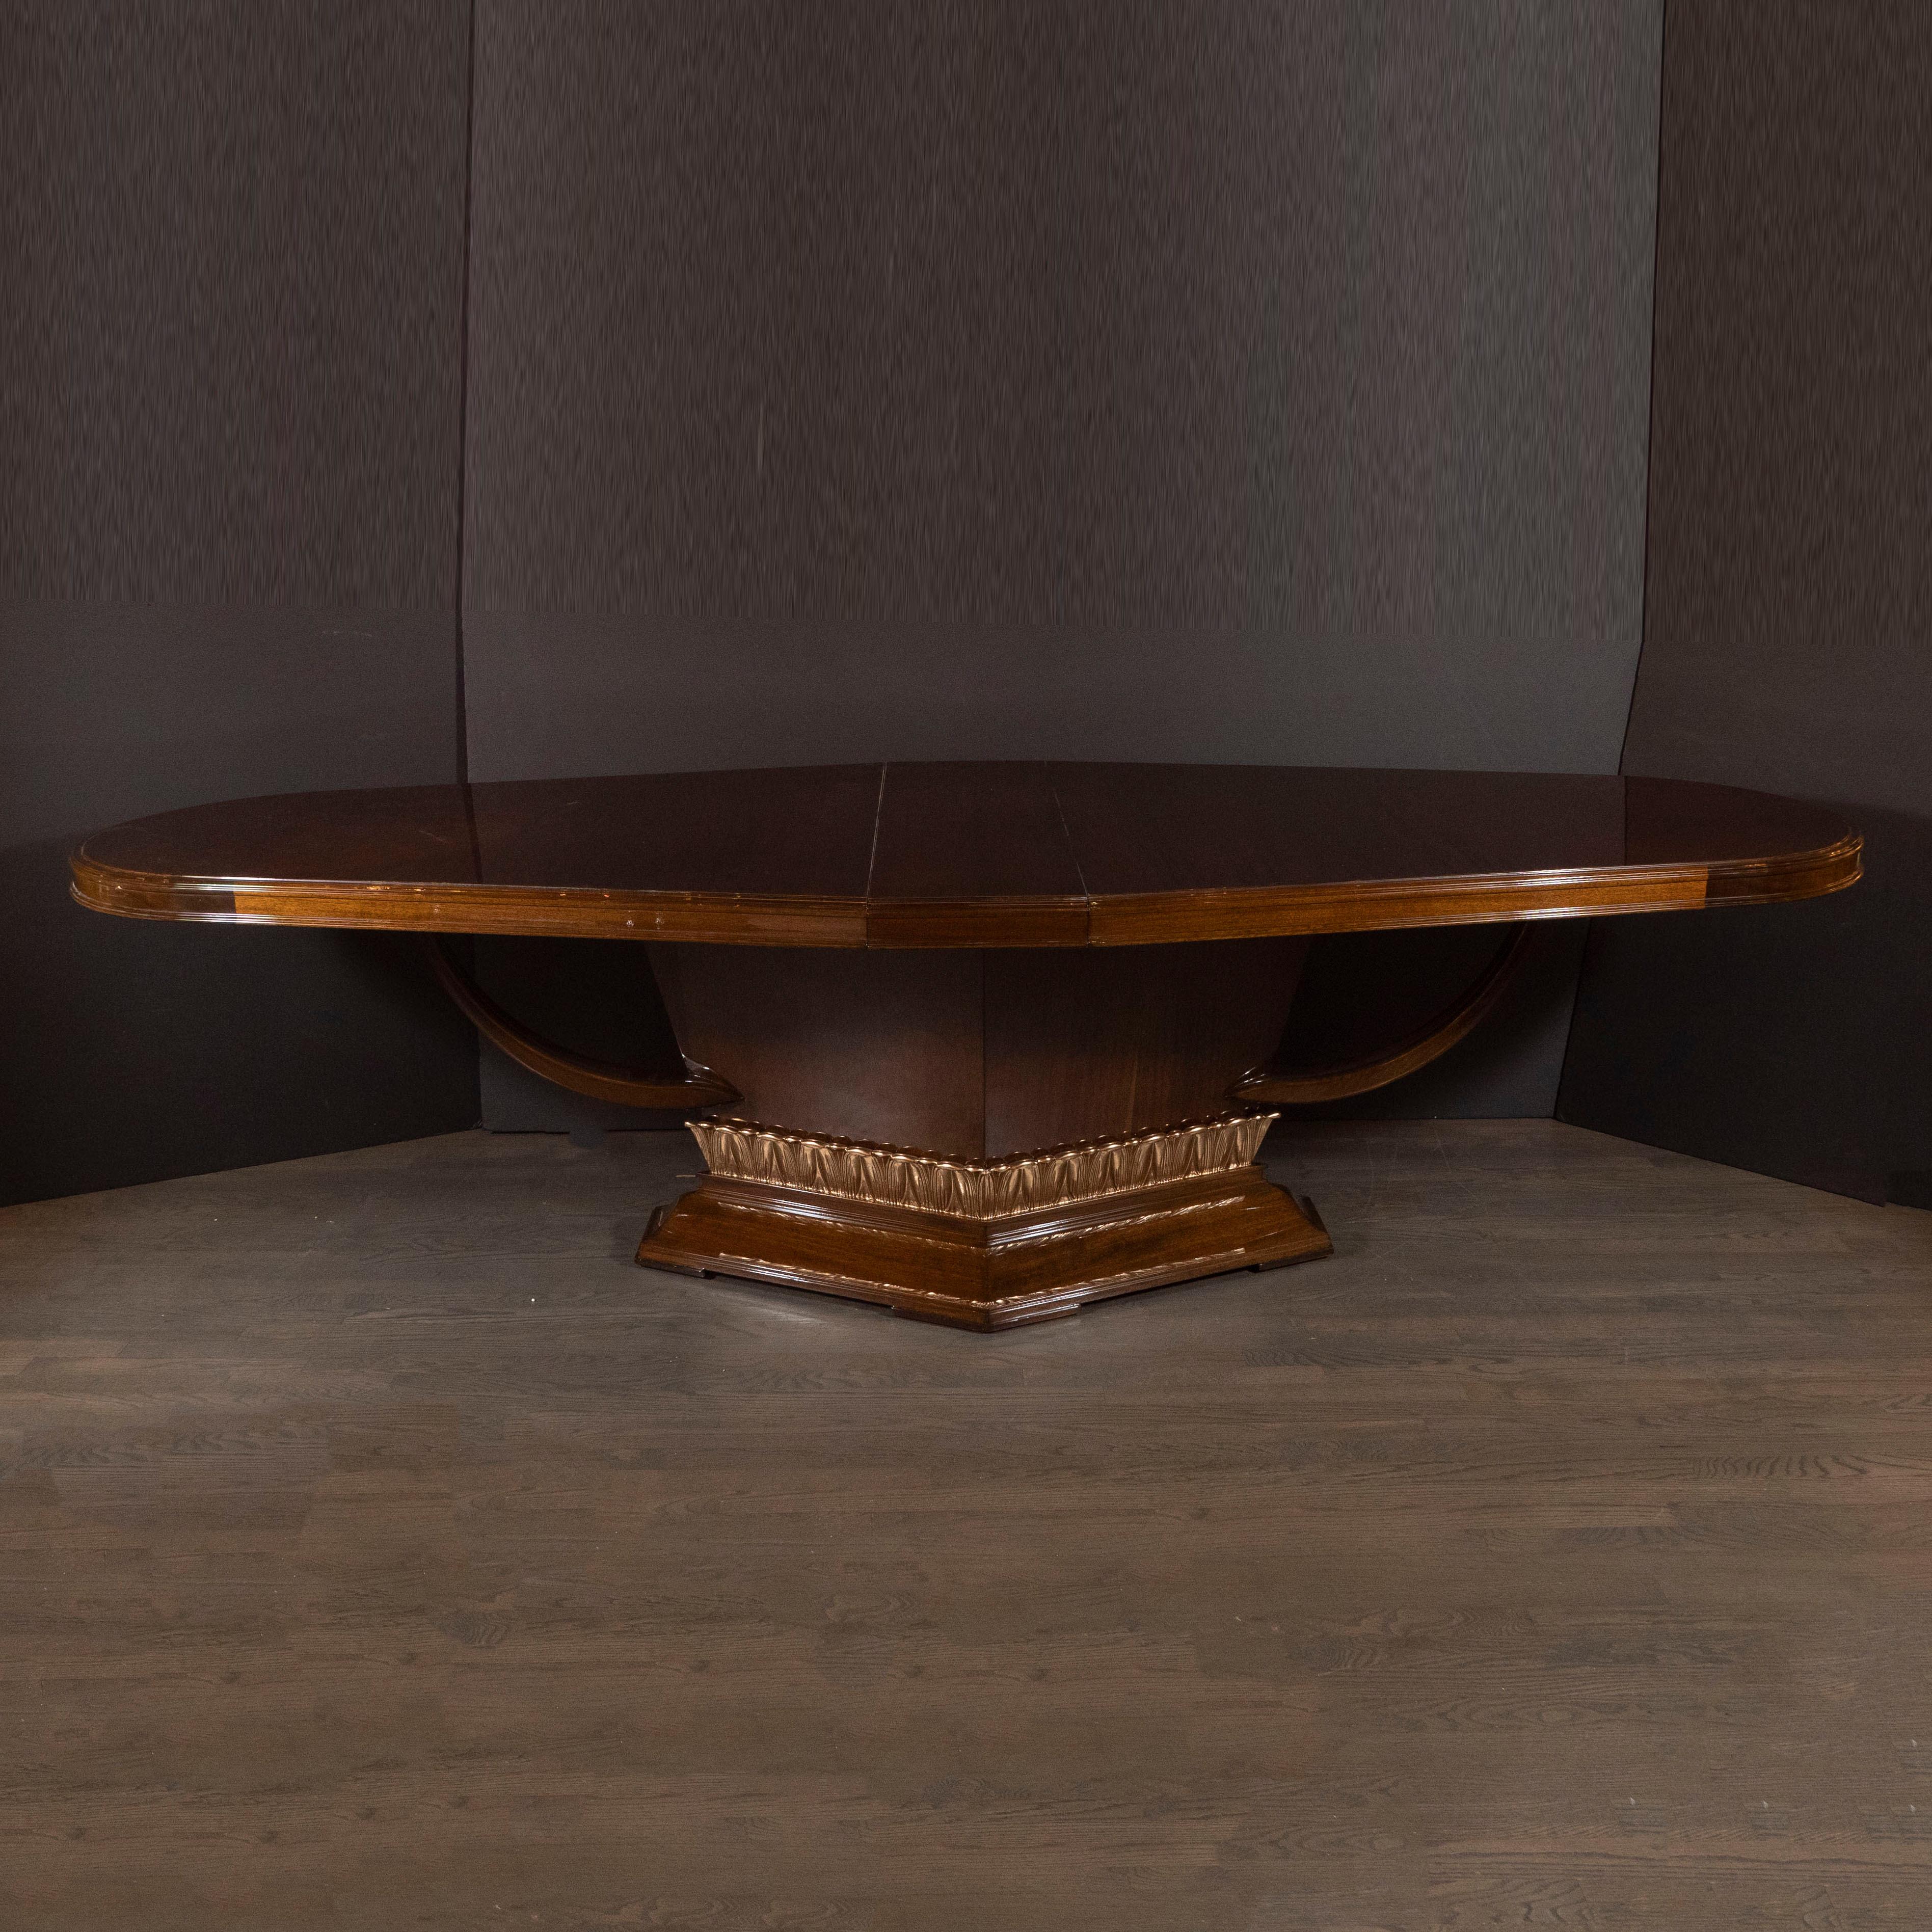 This stunning high style Art Deco dining table was realized in France, circa 1940. It features a bookmatched mahogany elongated ovoid top- exhibiting a beautiful natural grain- with streamlined supports on each side. Additionally, the polygonal base